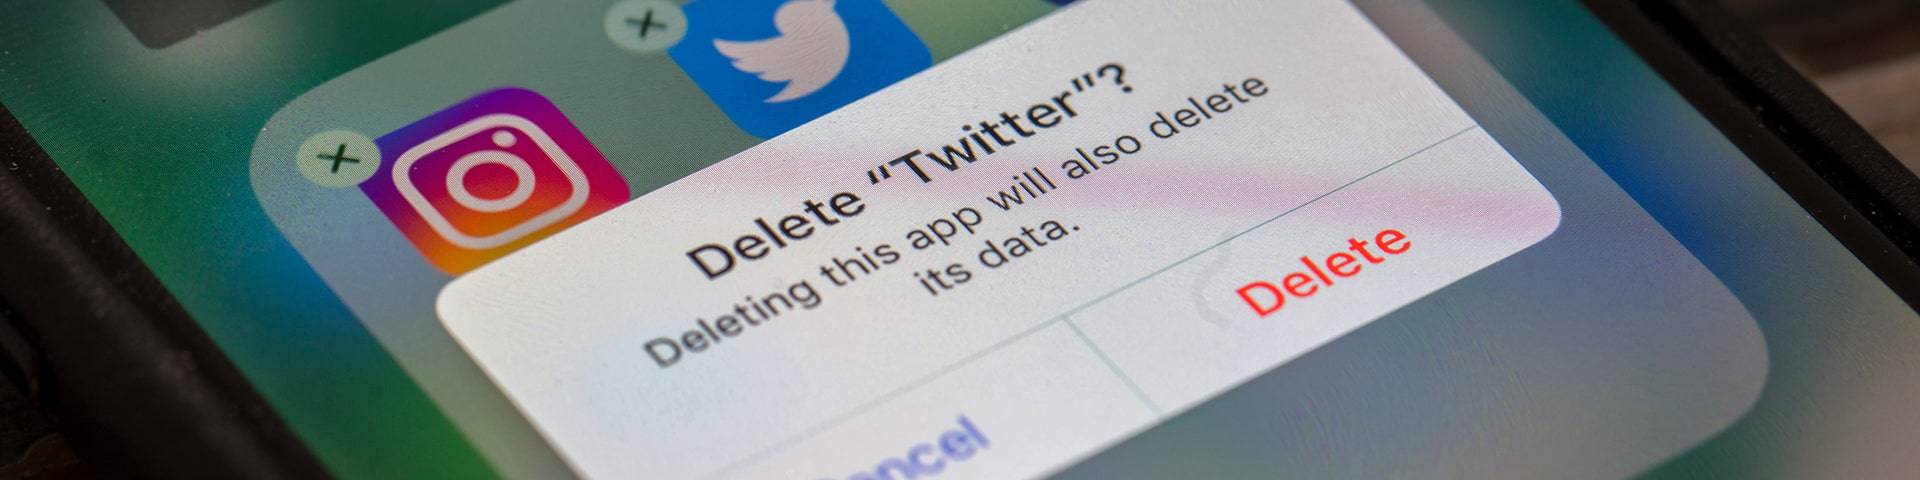 How to Delete or Deactivate Your Twitter Account: The Easy Guide